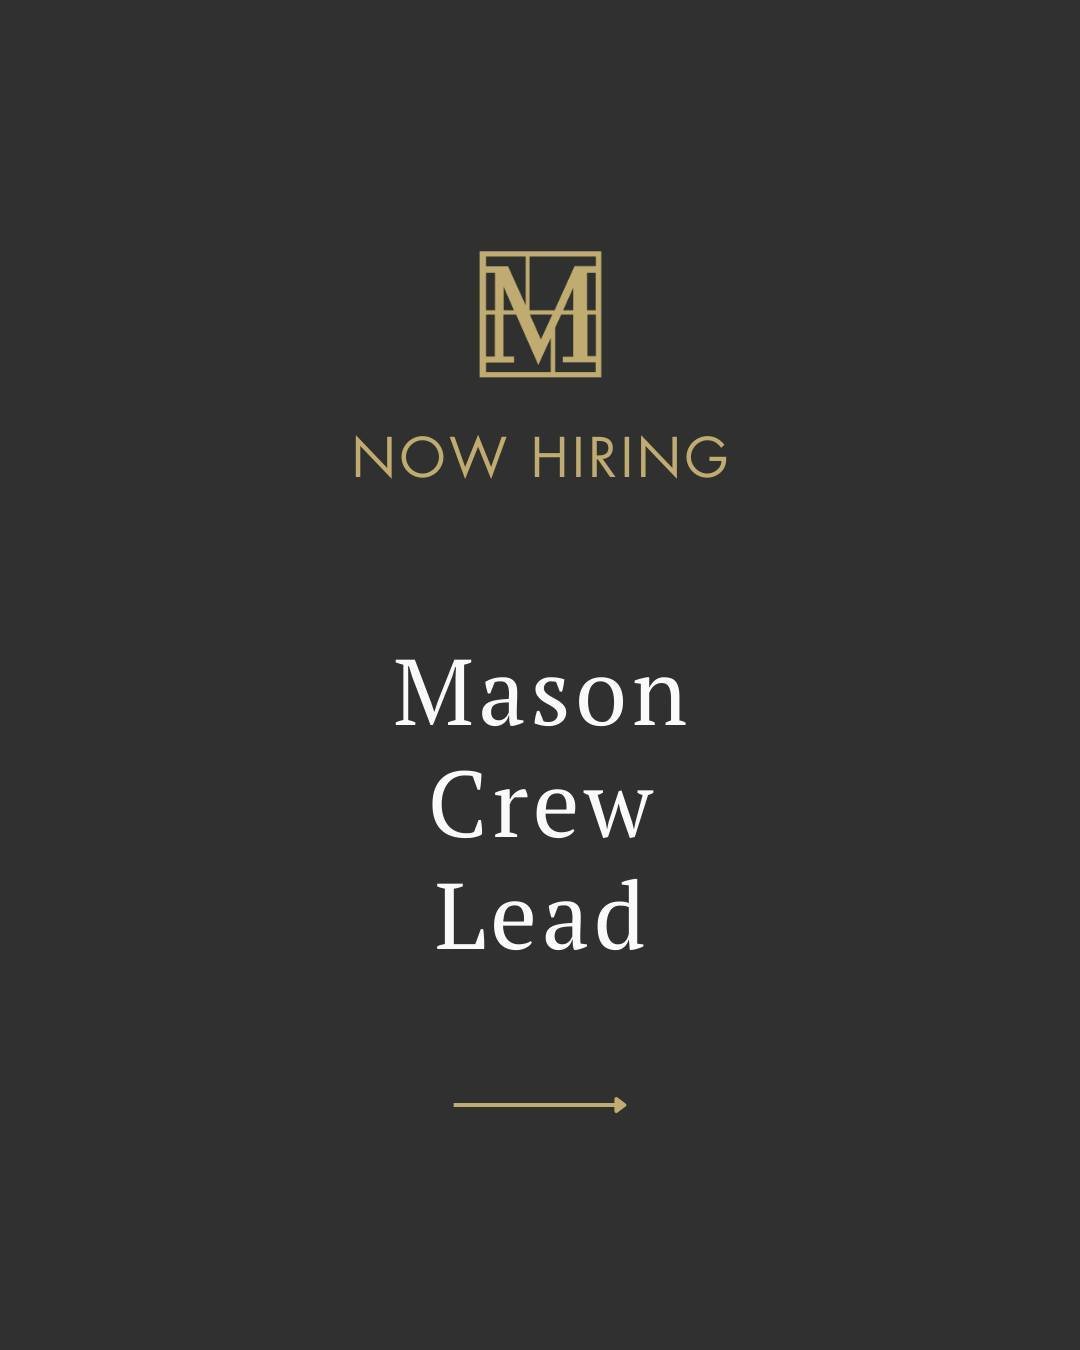 A Mason Crew Leader is an invaluable member of the @rpmarzillilandscape team; someone who has an eye for quality, communicates well with teams and motivates others. Could this be you?⁠
⁠
Now hiring for this role at the link in our bio.